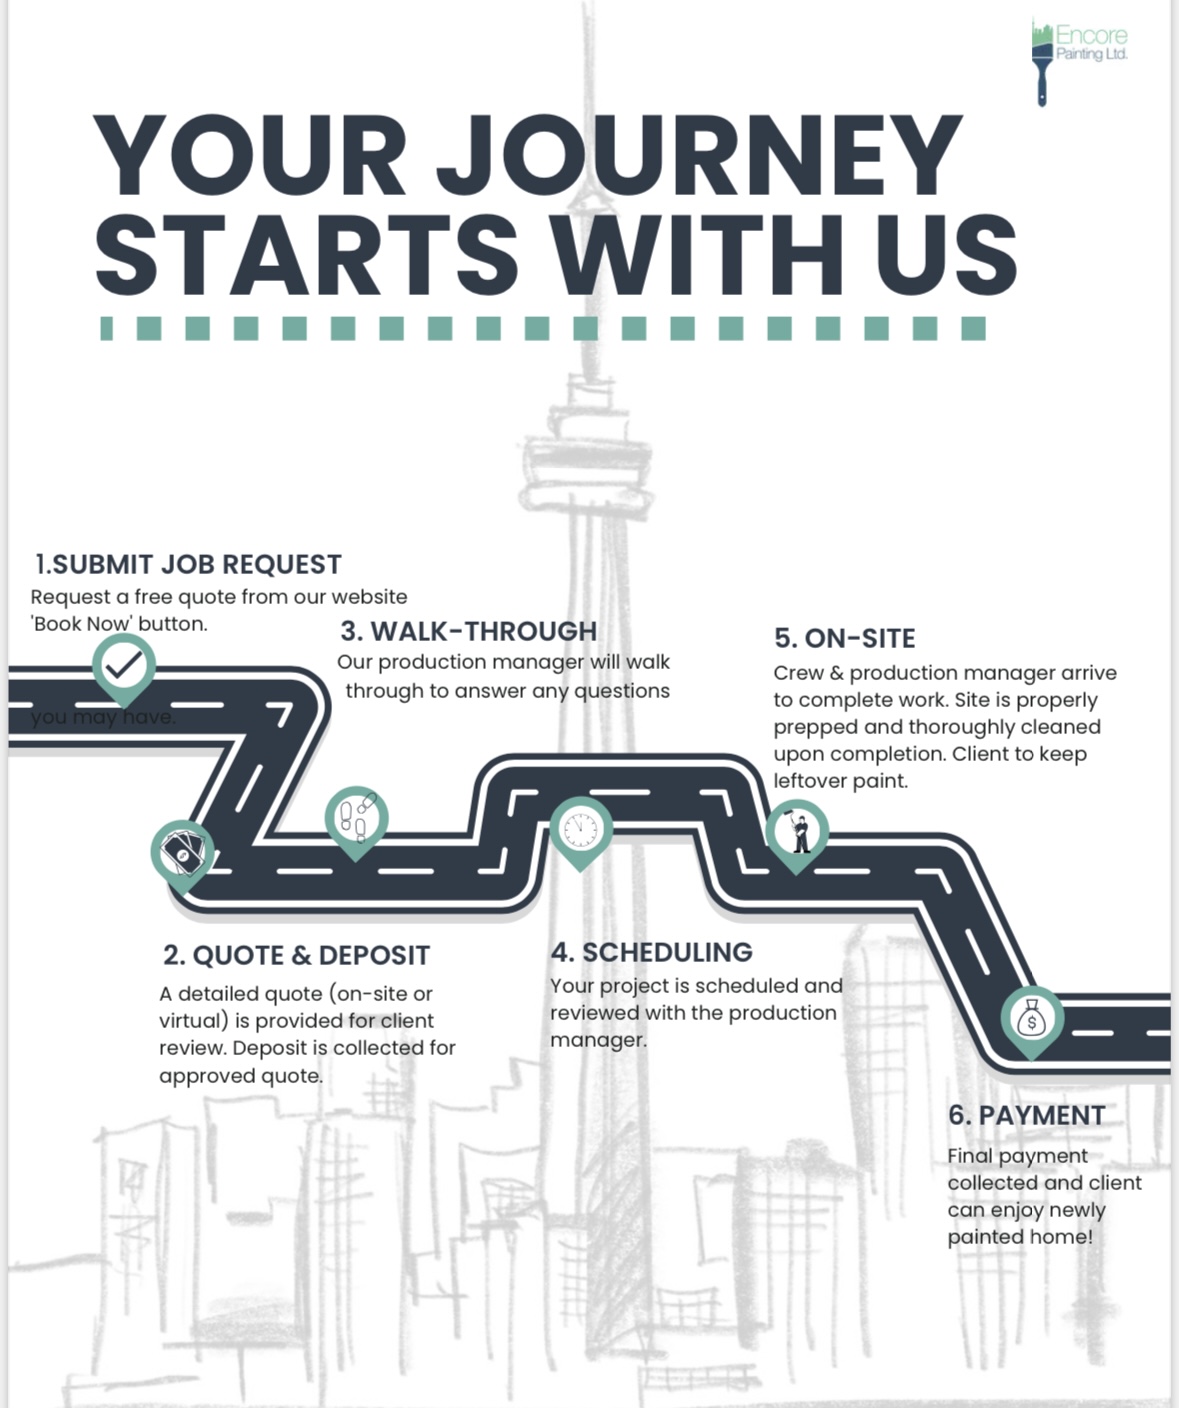 your step by step journey with us